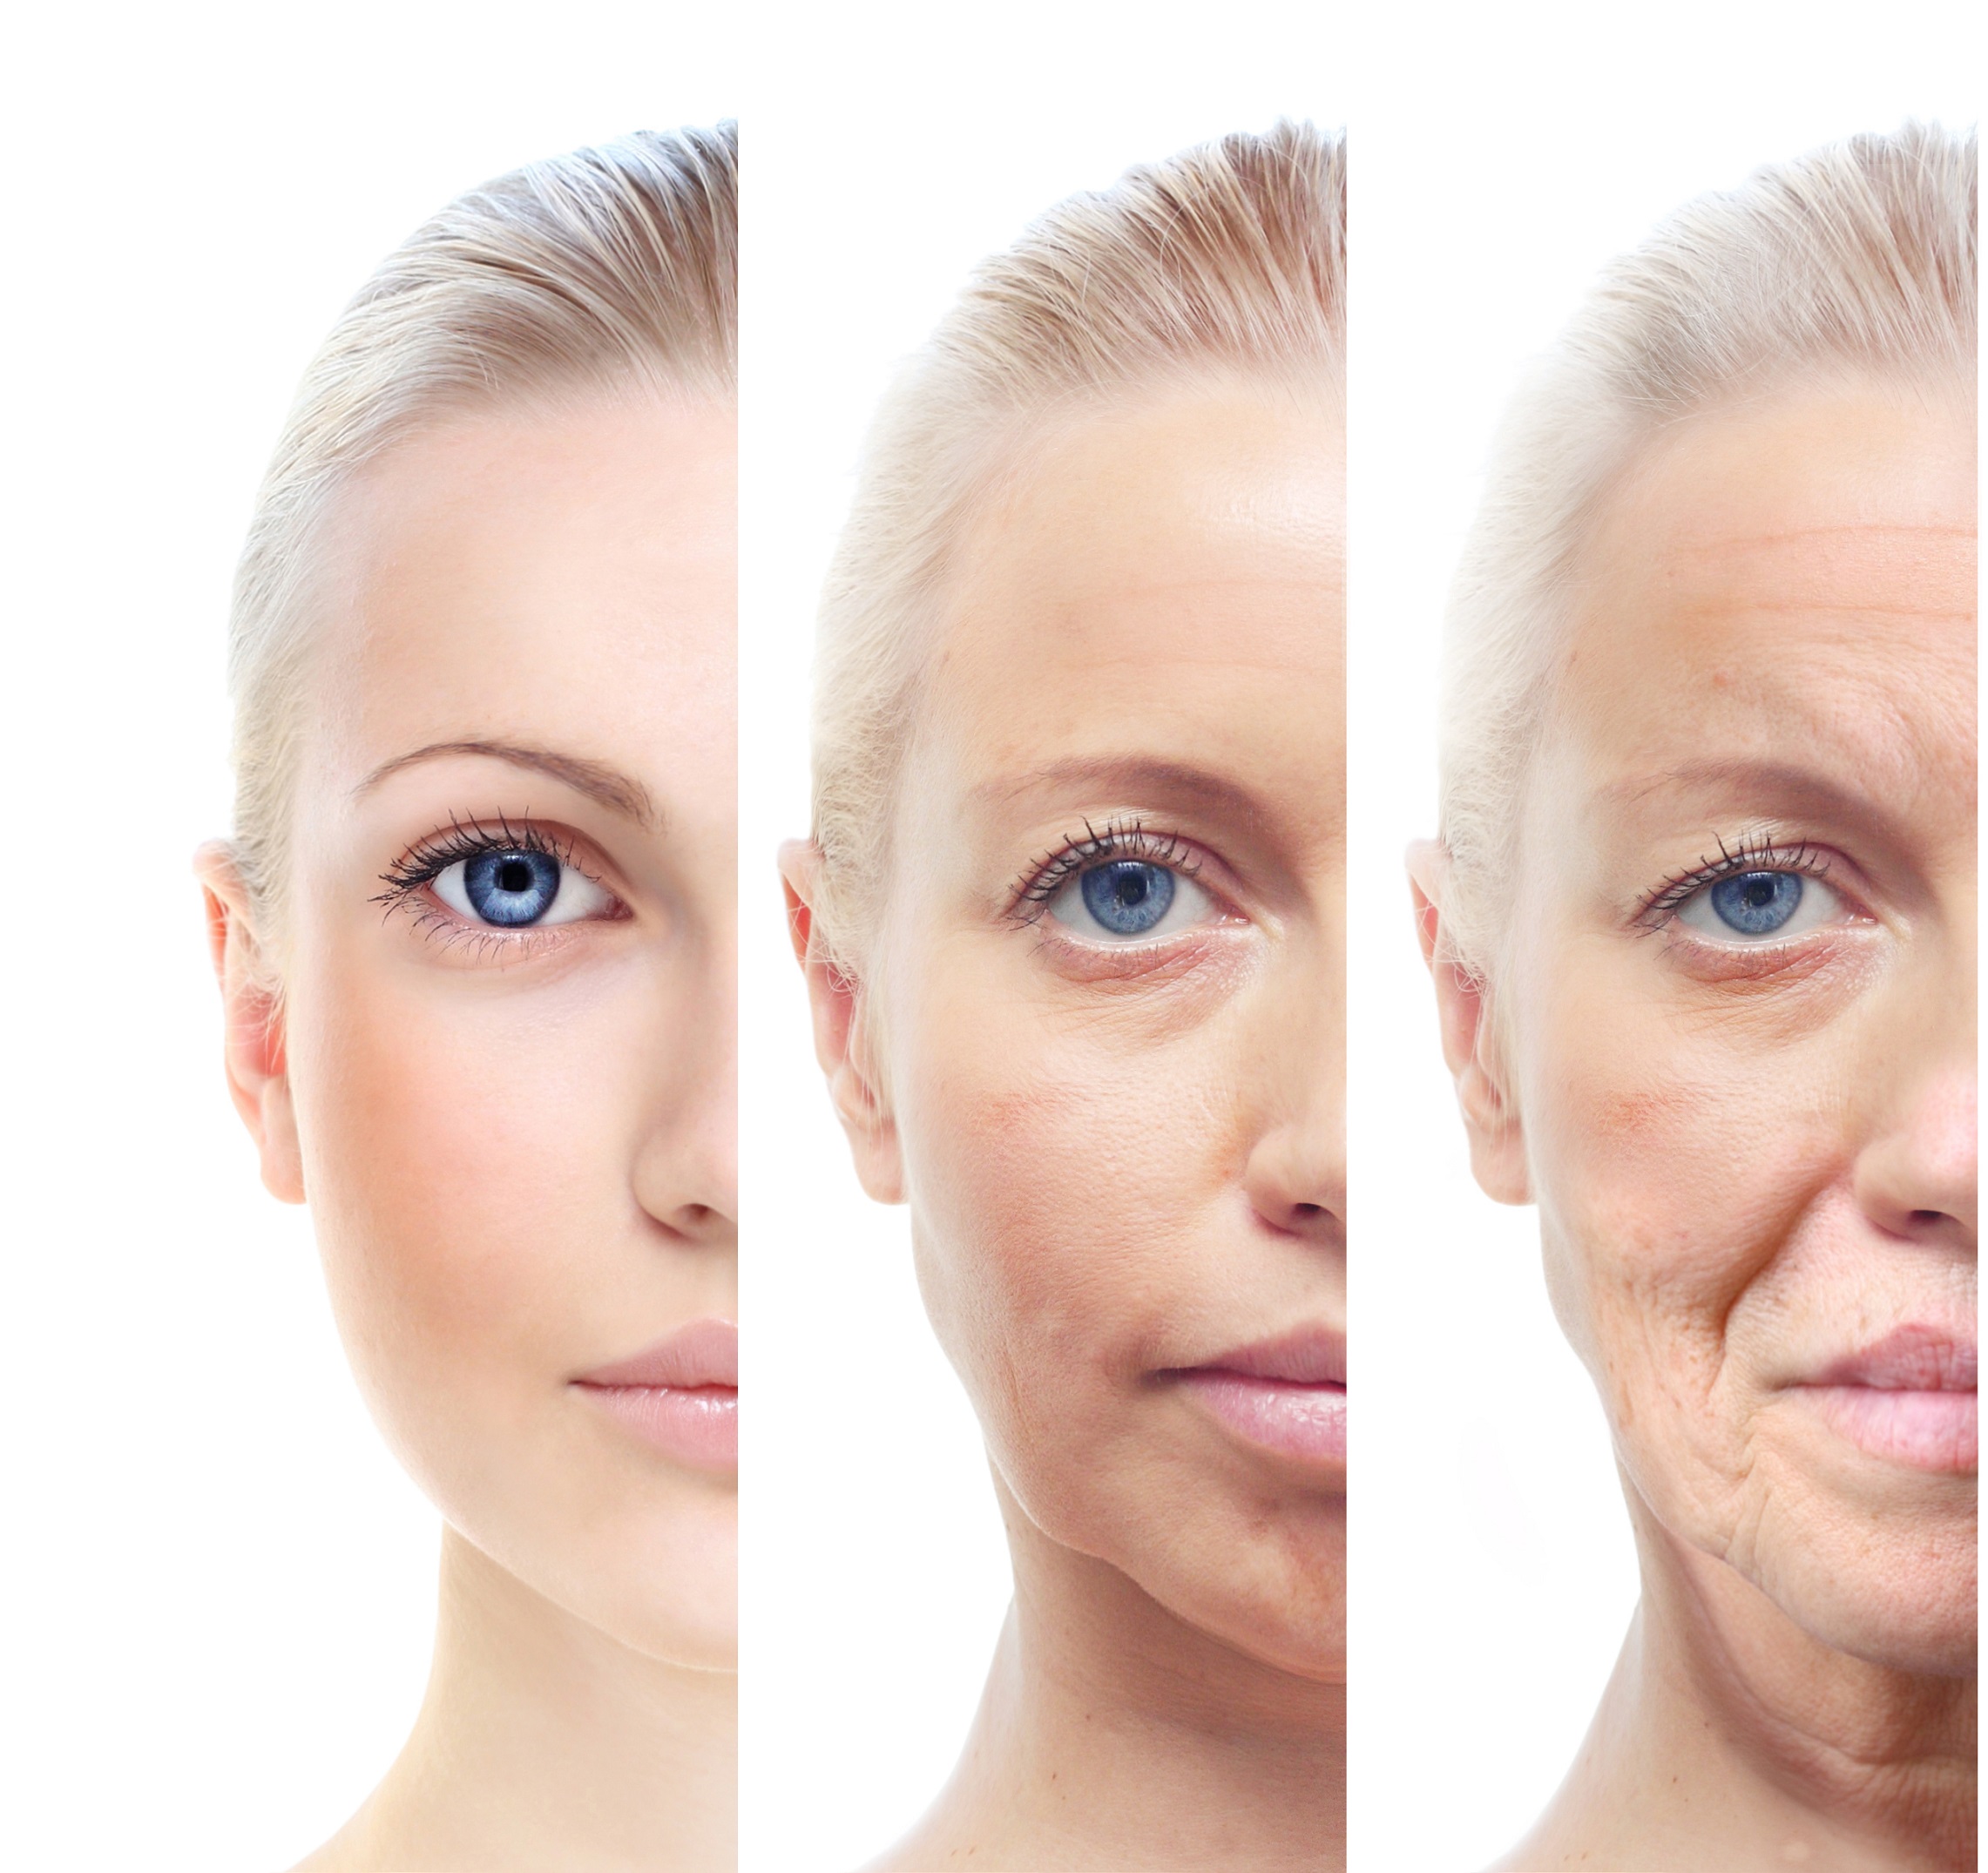 3 DIET MISTAKES YOU SHOULD STOP MAKING OVER 40 BECAUSE THEY MAKE AGING SKIN SO MUCH WORSE